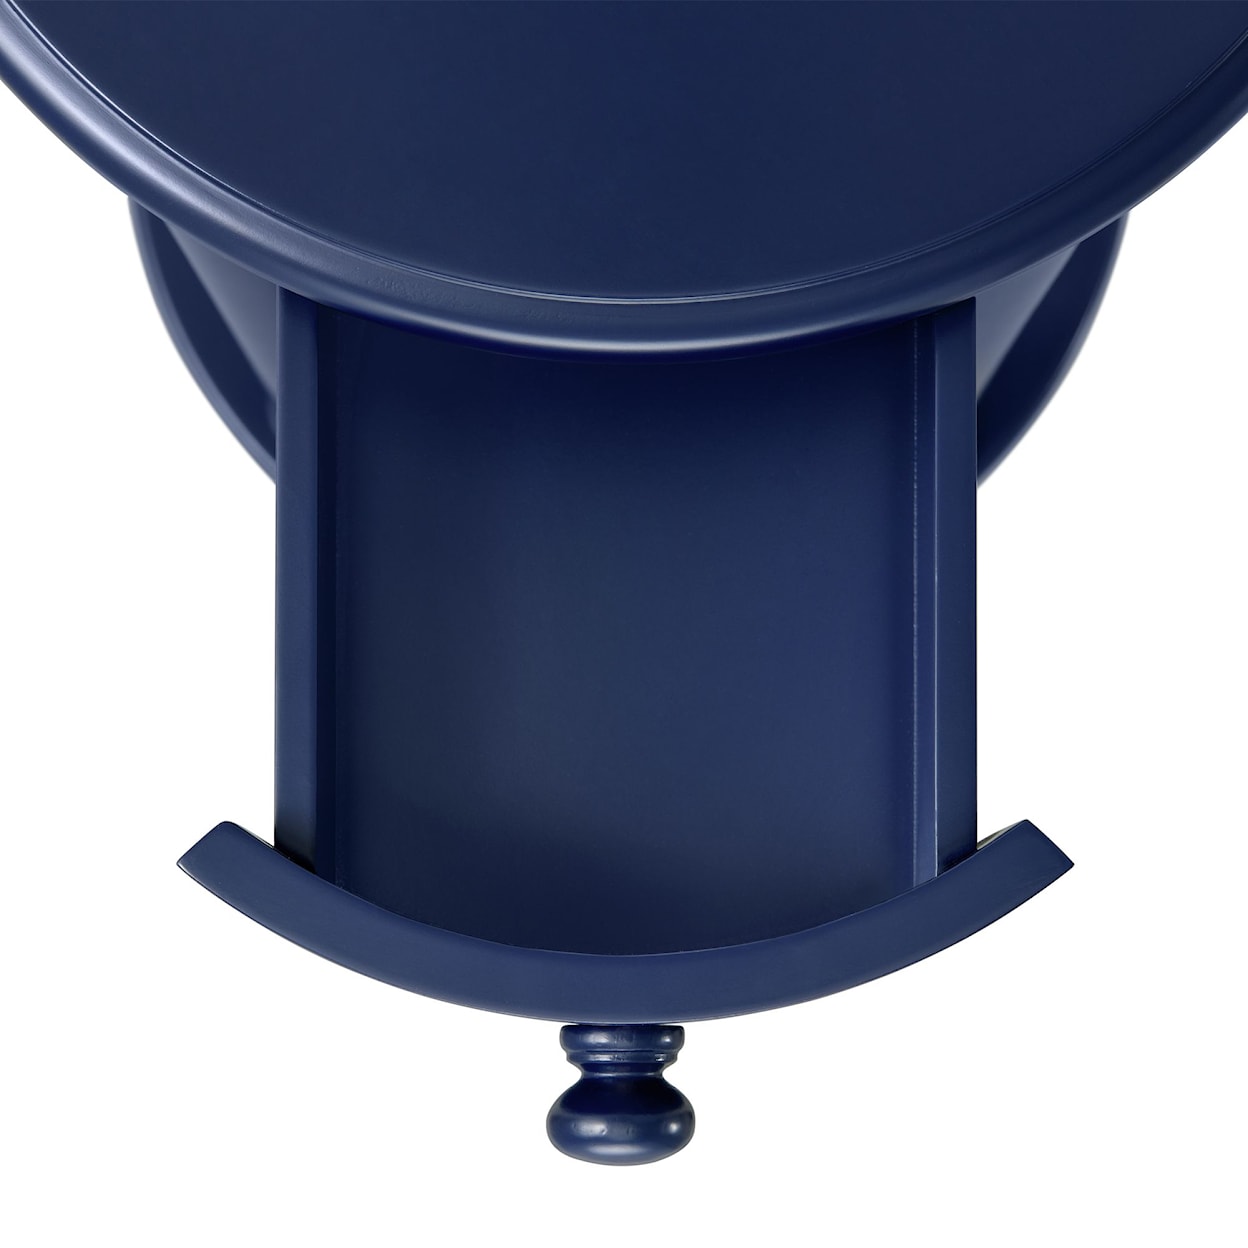 Elements Nico Chairside Table